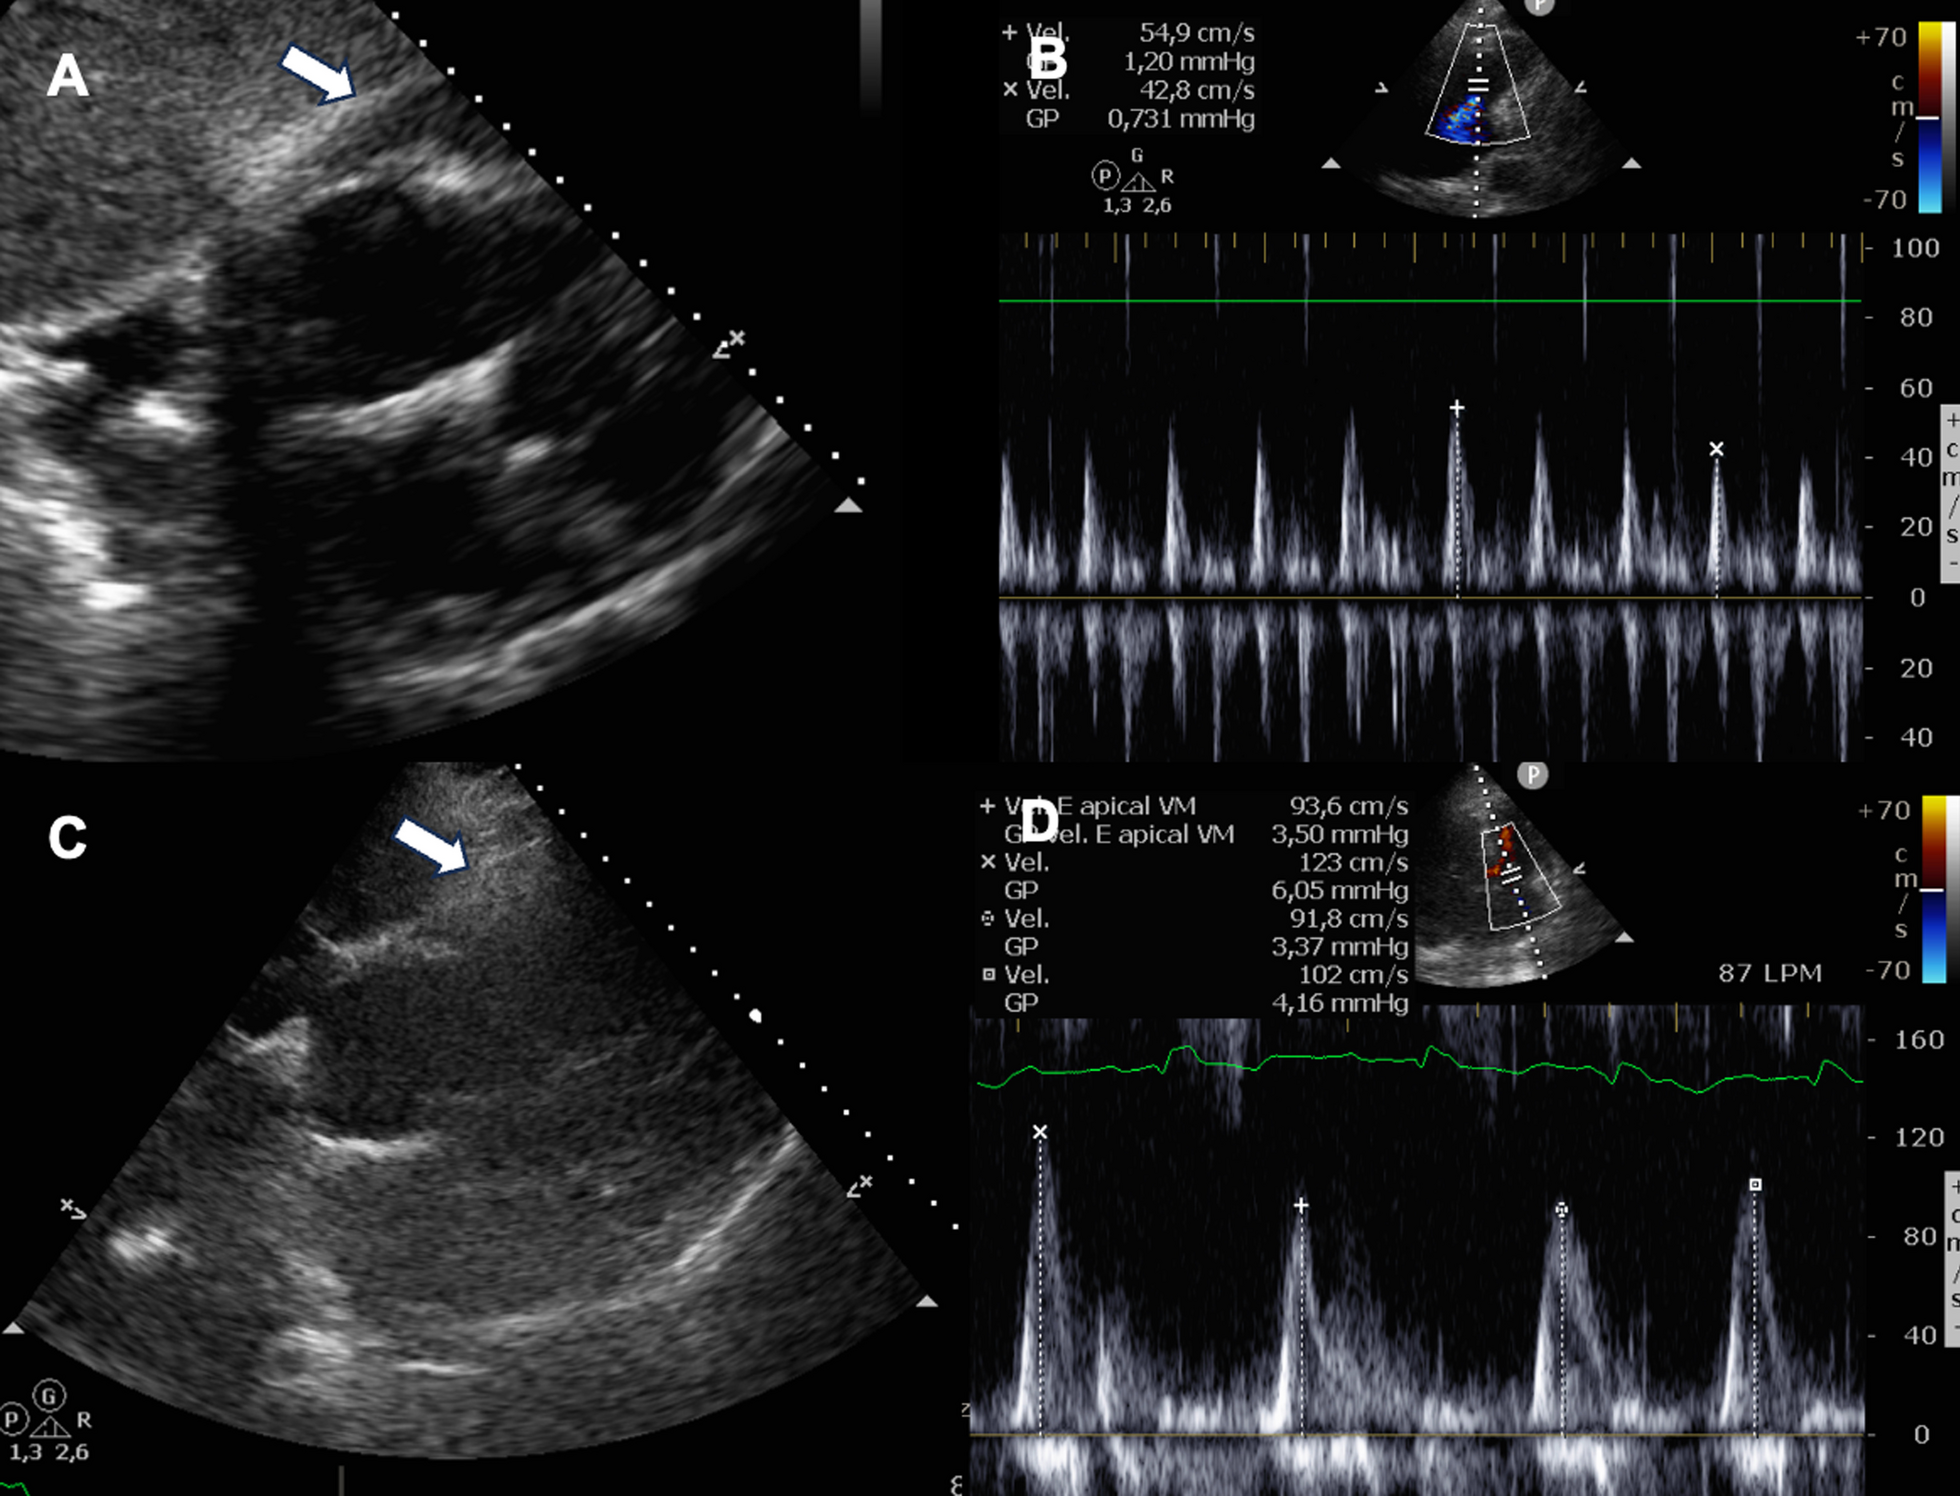 Intra-pericardial thrombin injection in iatrogenic cardiac tamponade: a case report